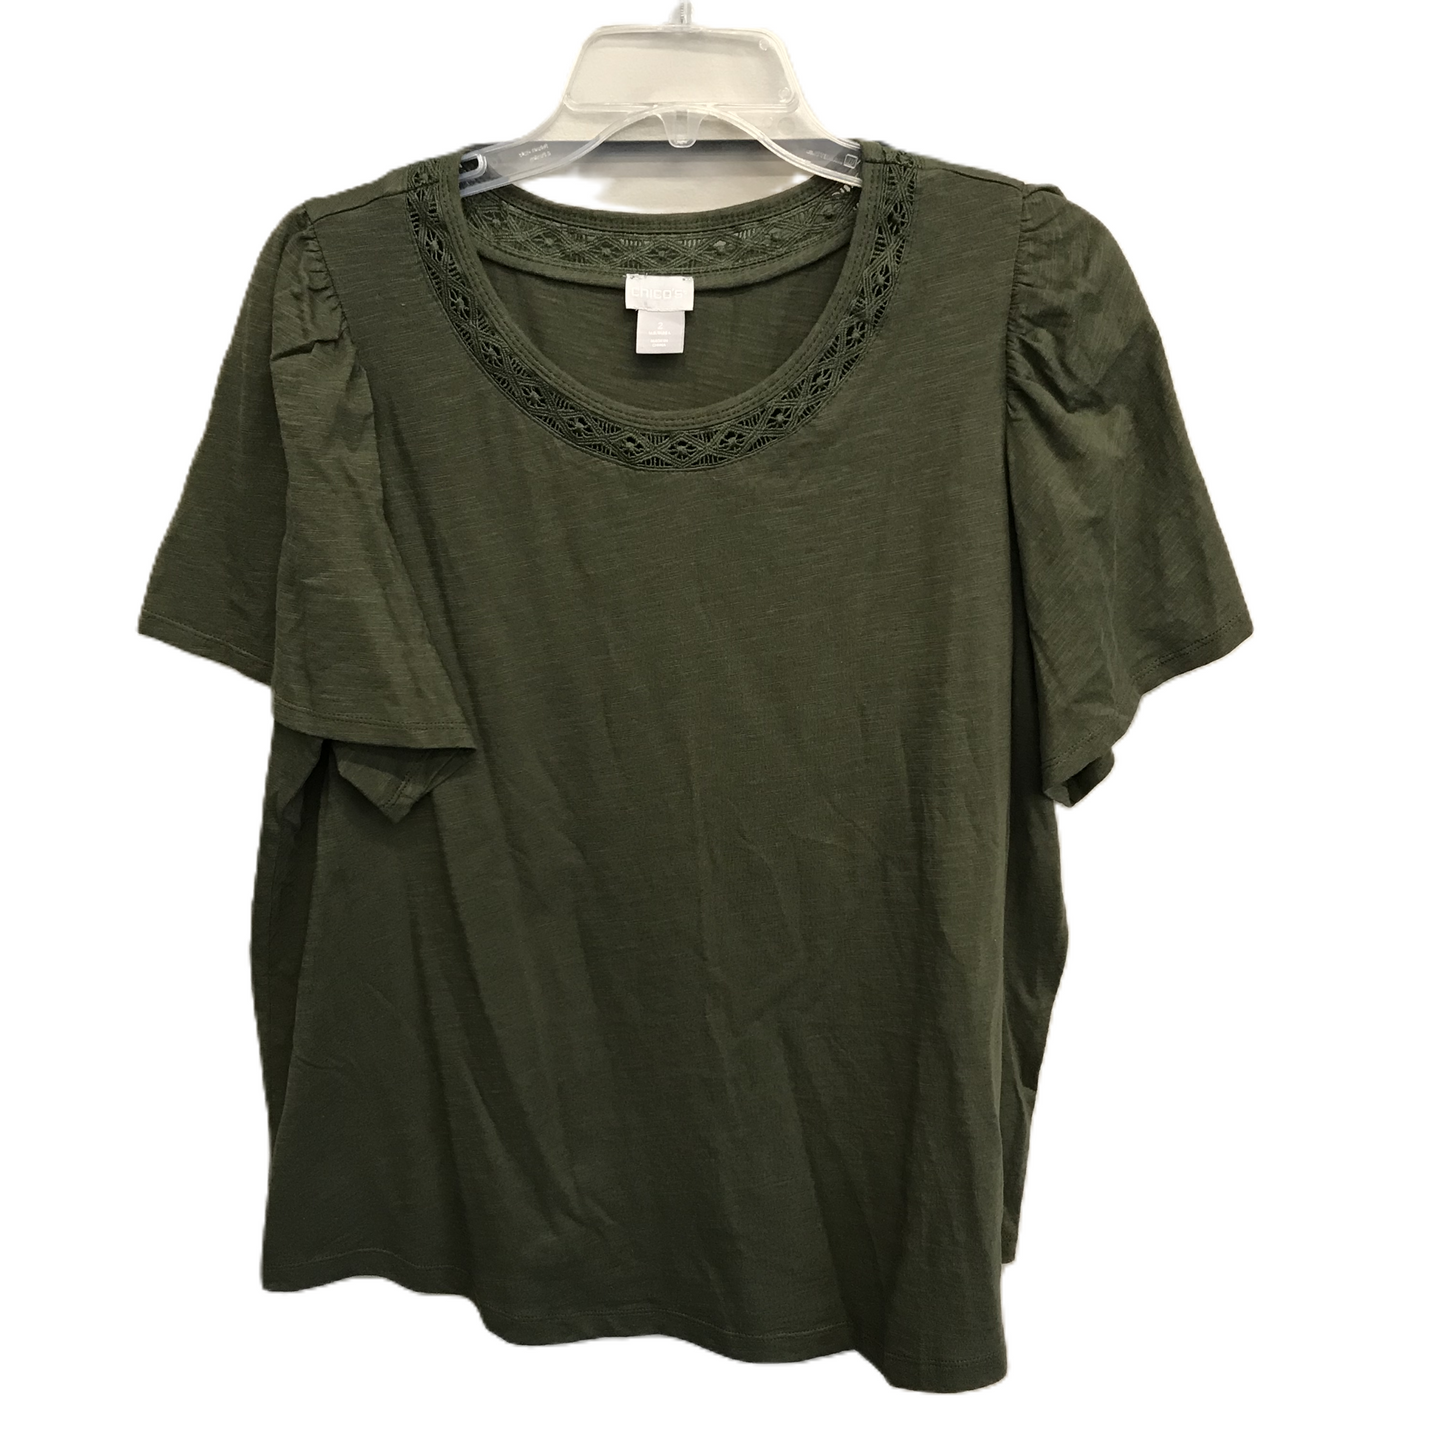 Green Top Short Sleeve Basic By Chicos, Size: L